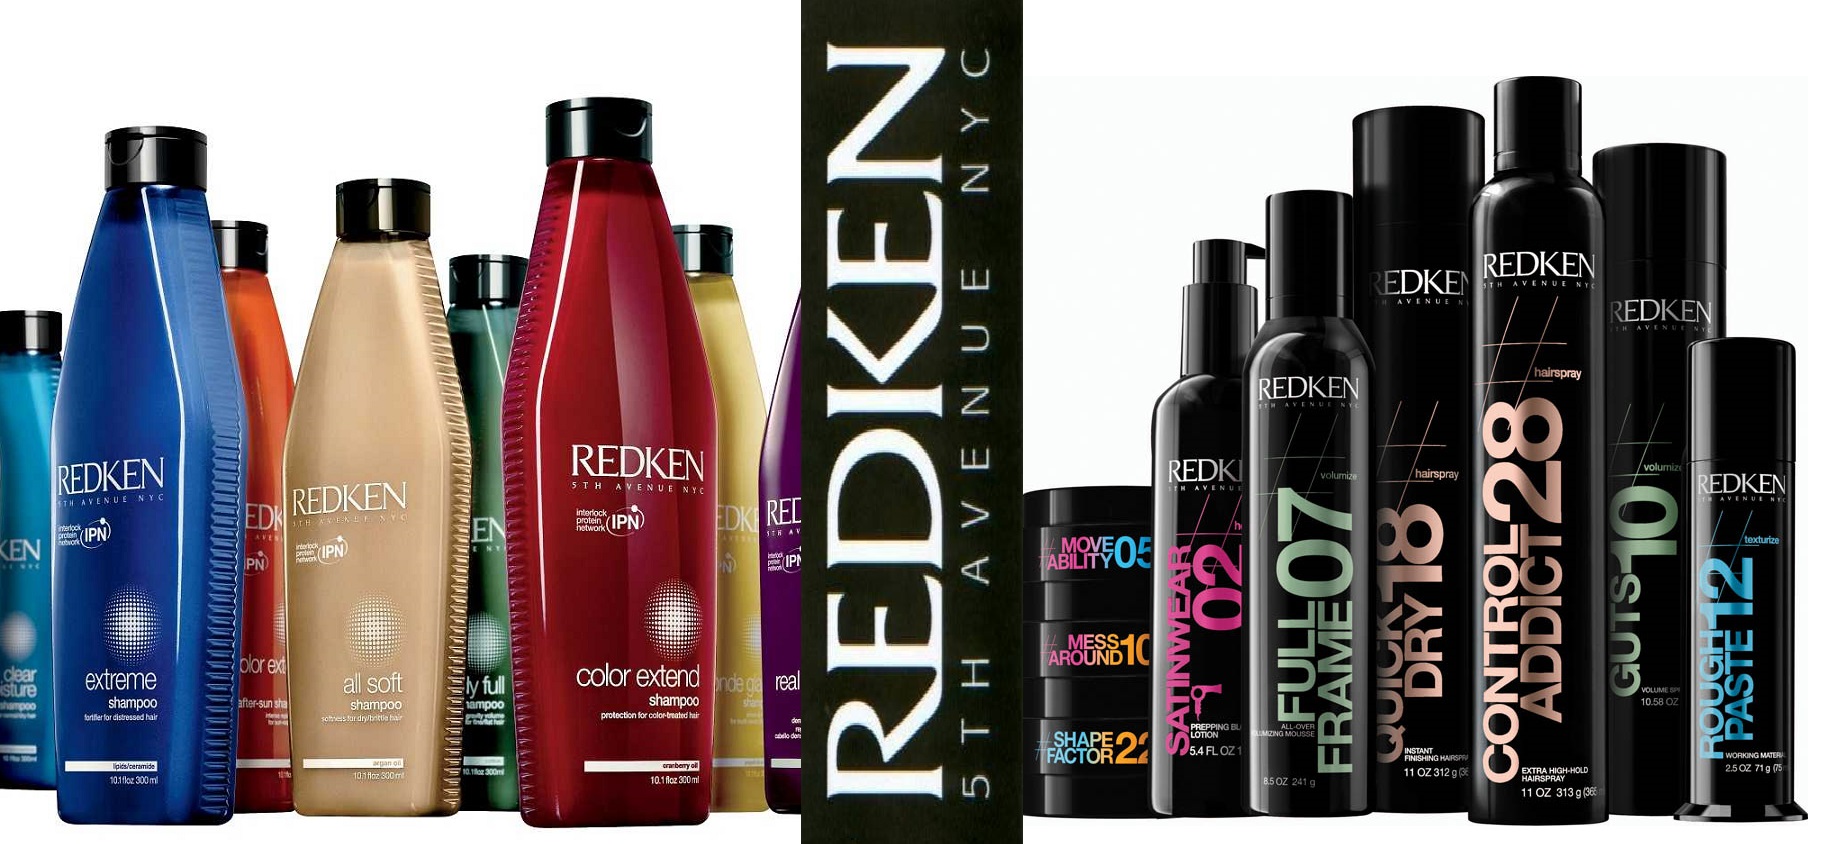 redken-products-all